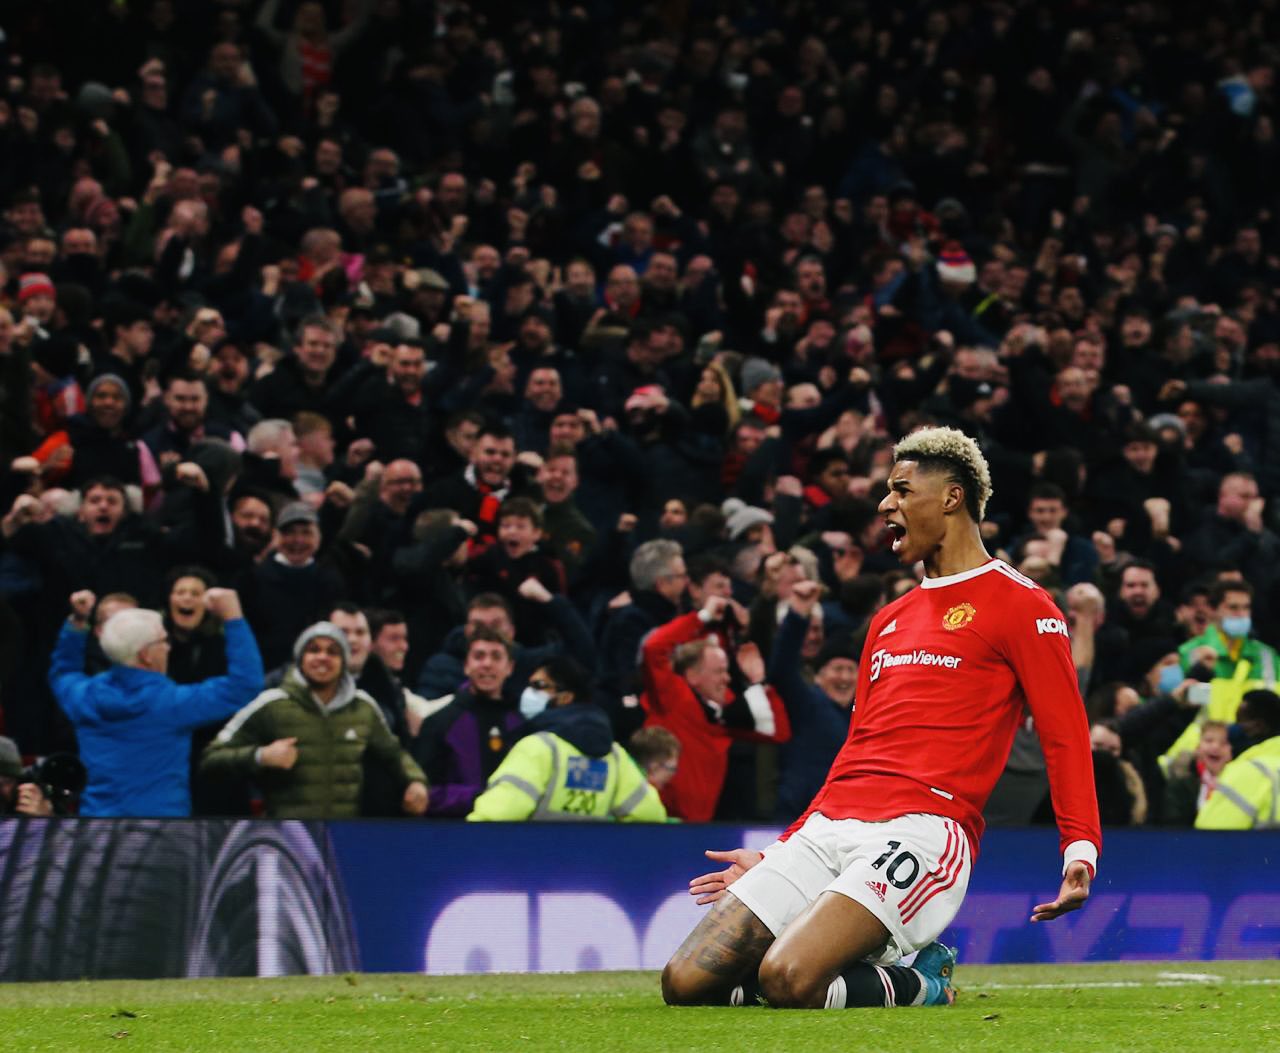 Marcus Rashford is committed to Manchester United amidst interest from PSG.